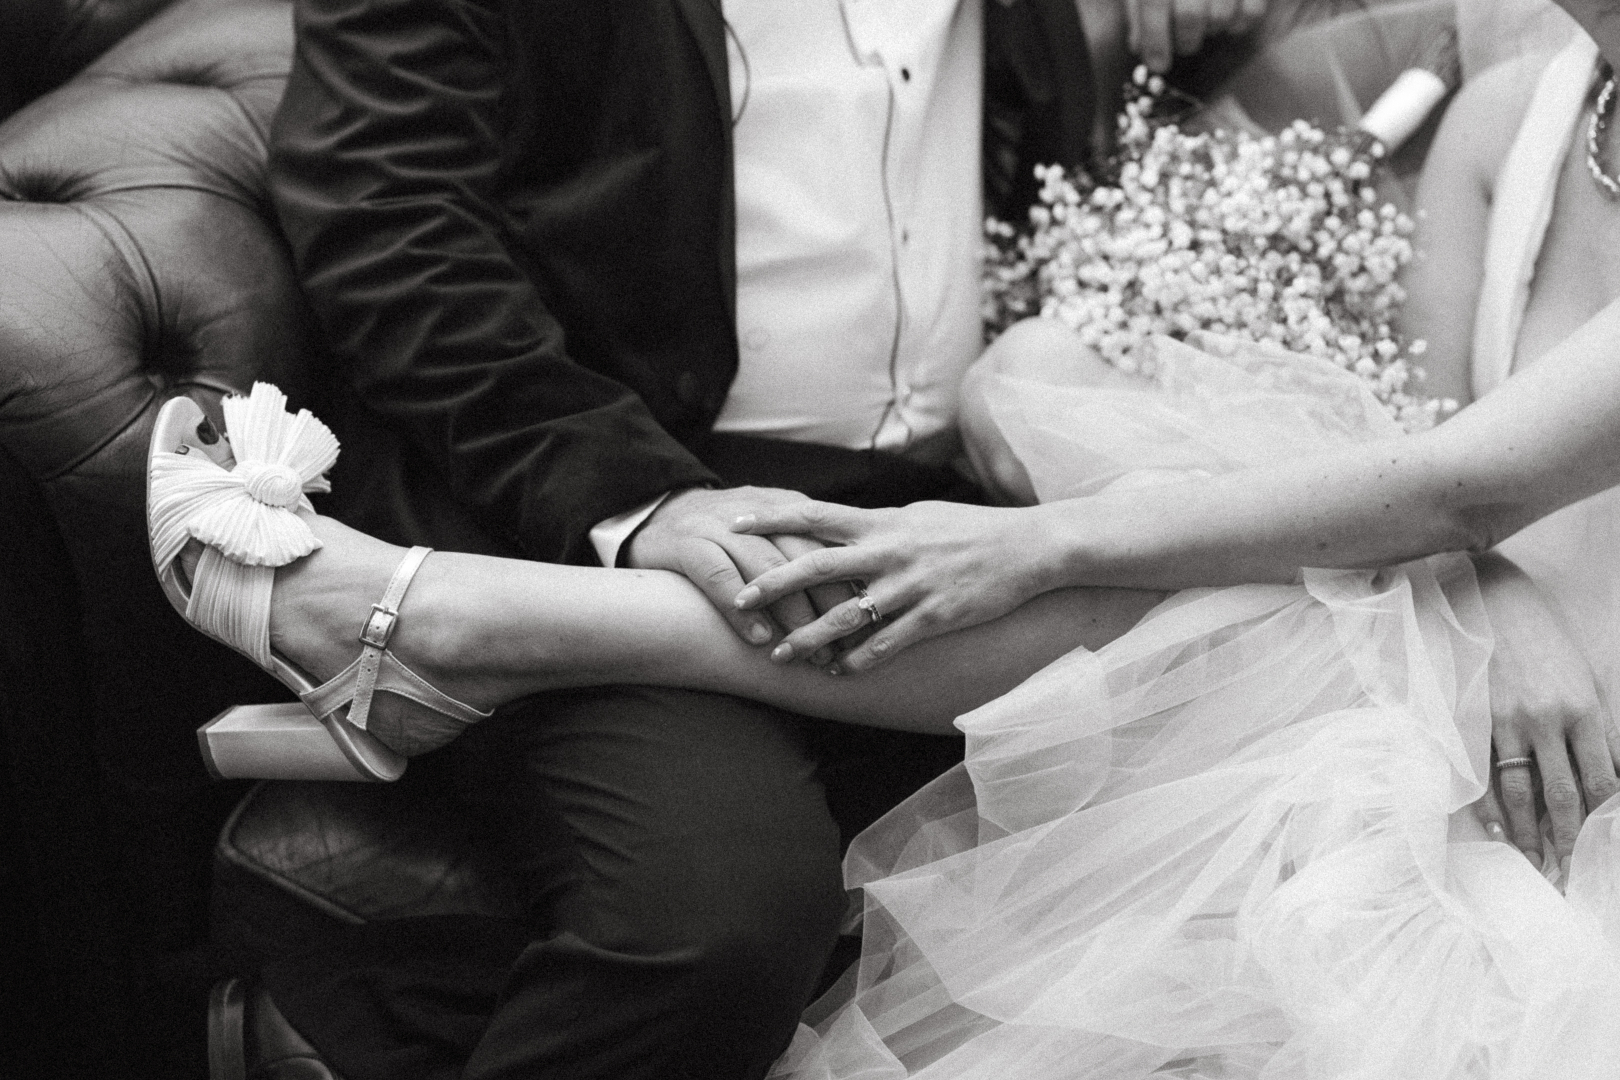 Black and white photo of a groom and bride sitting together. Women's leg across the mans lap.